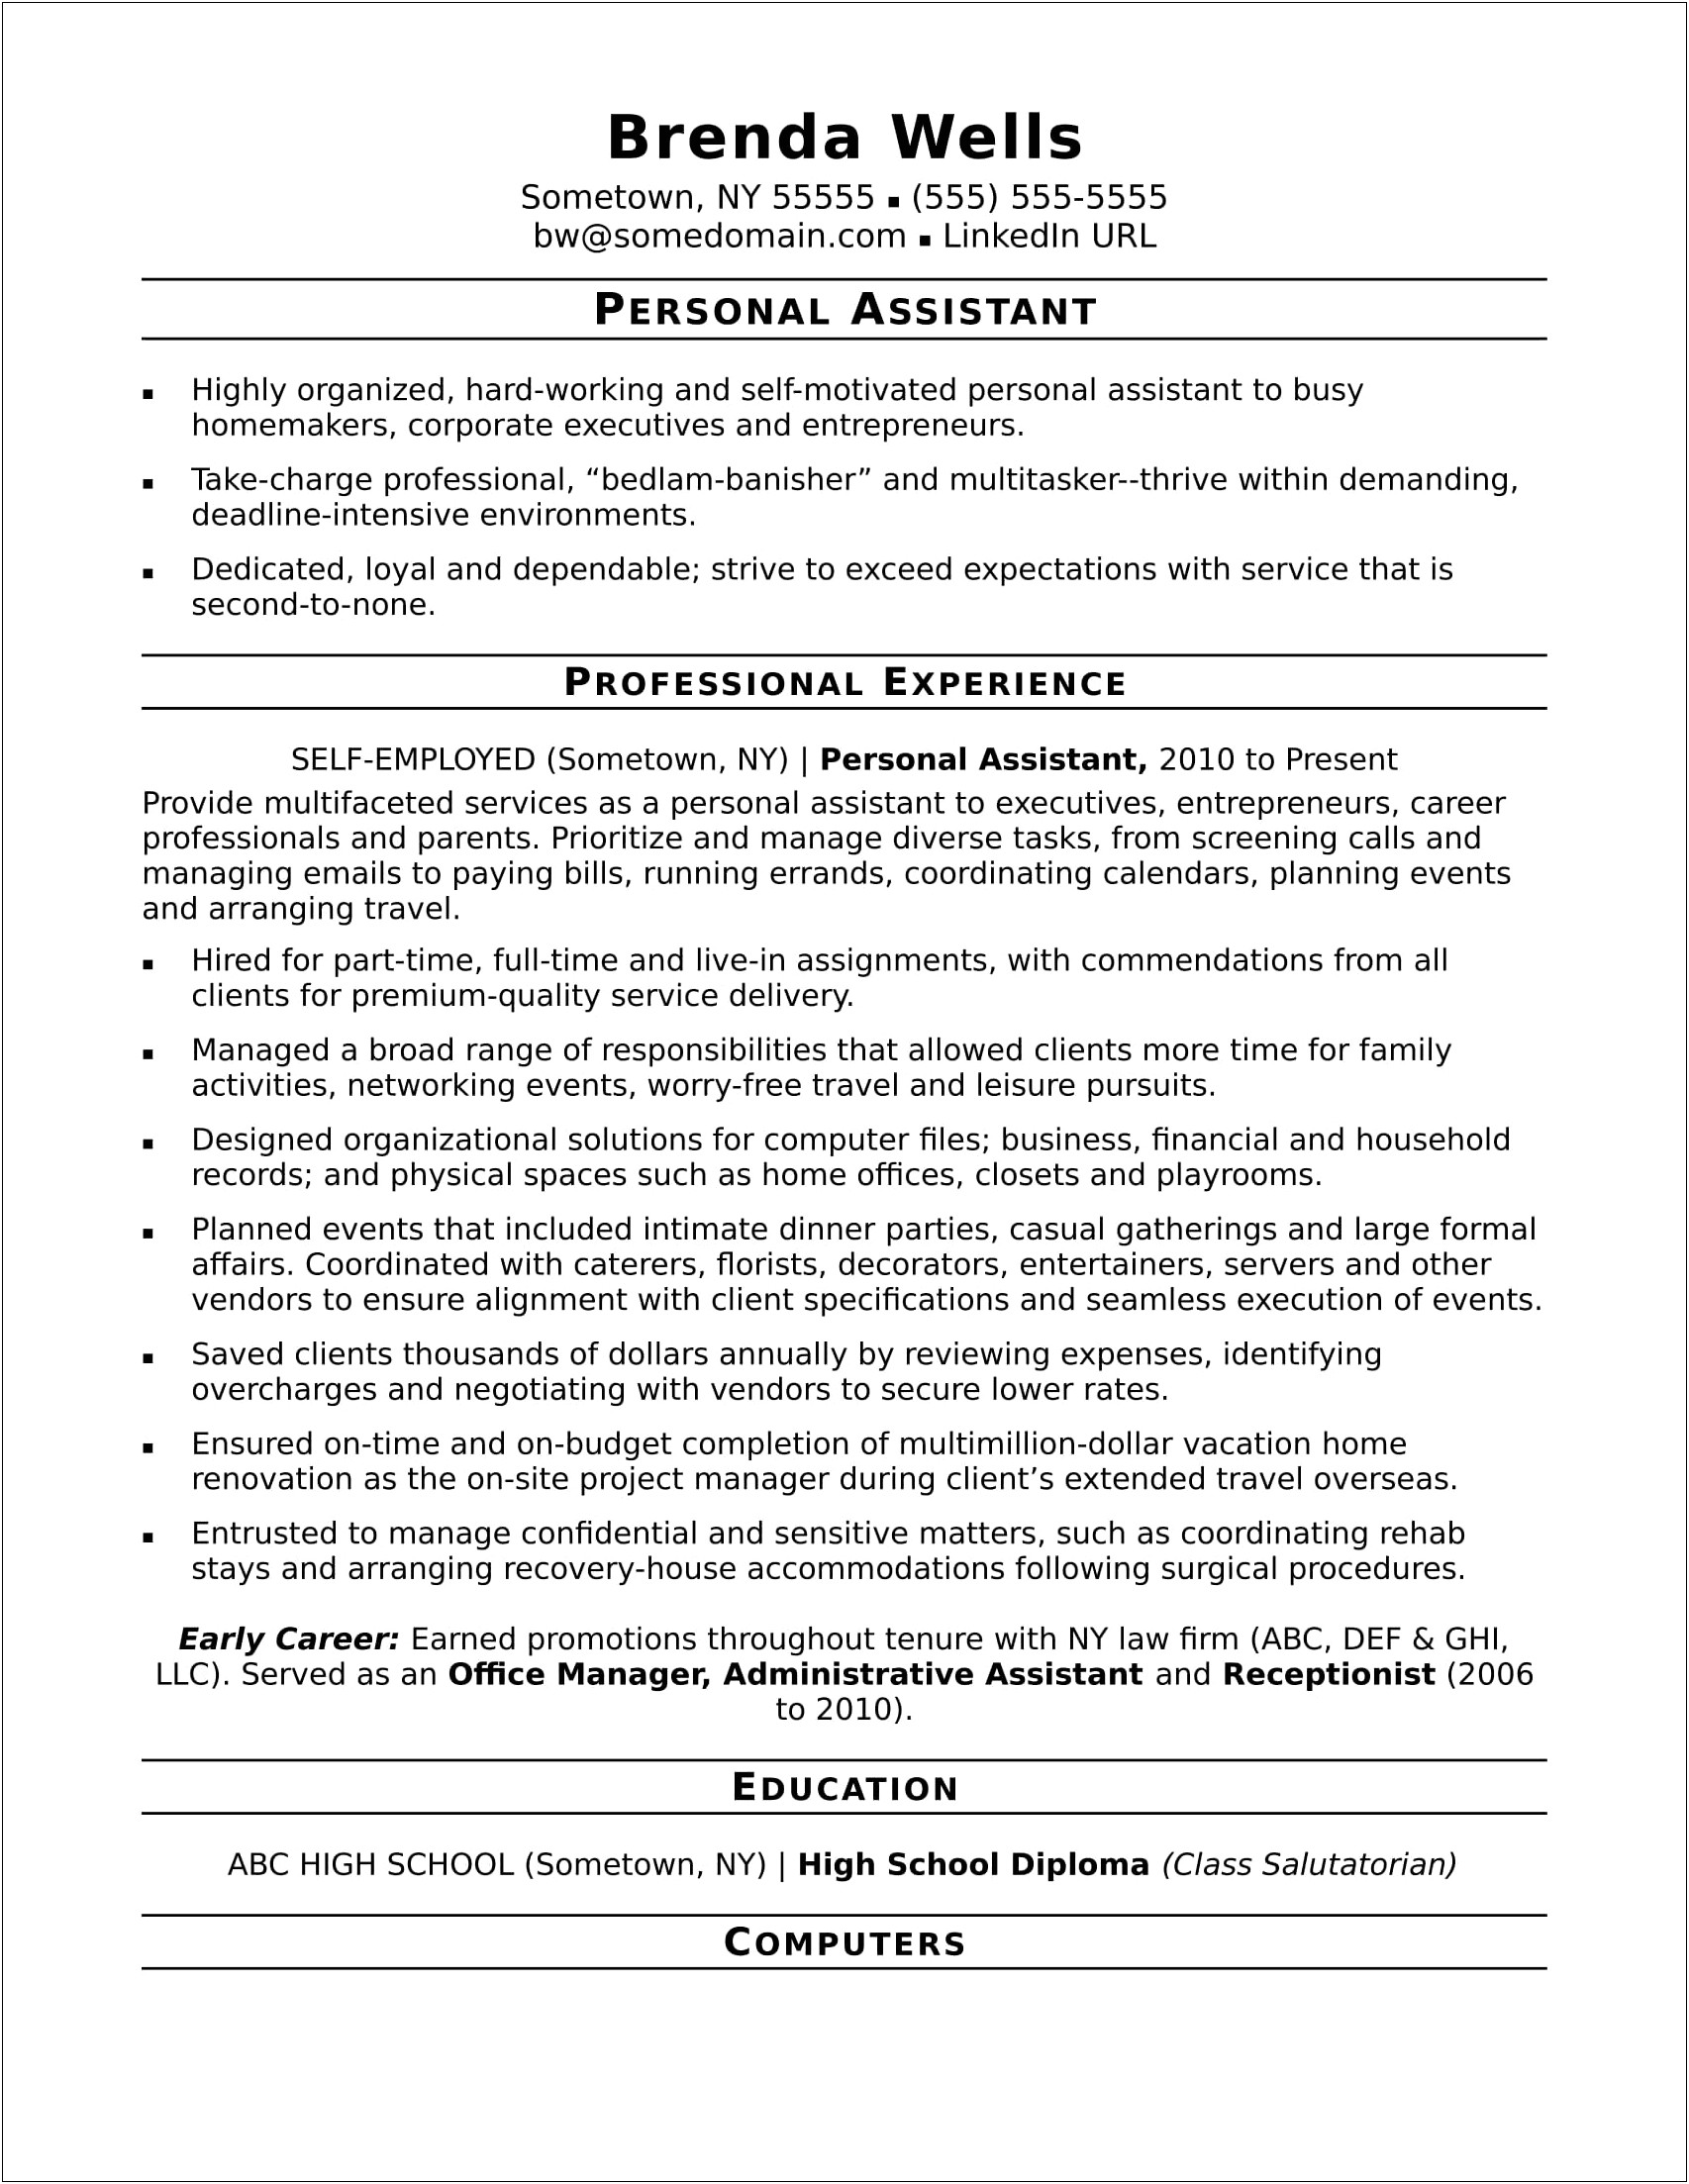 Resume Objective For Law Firm Receptionist